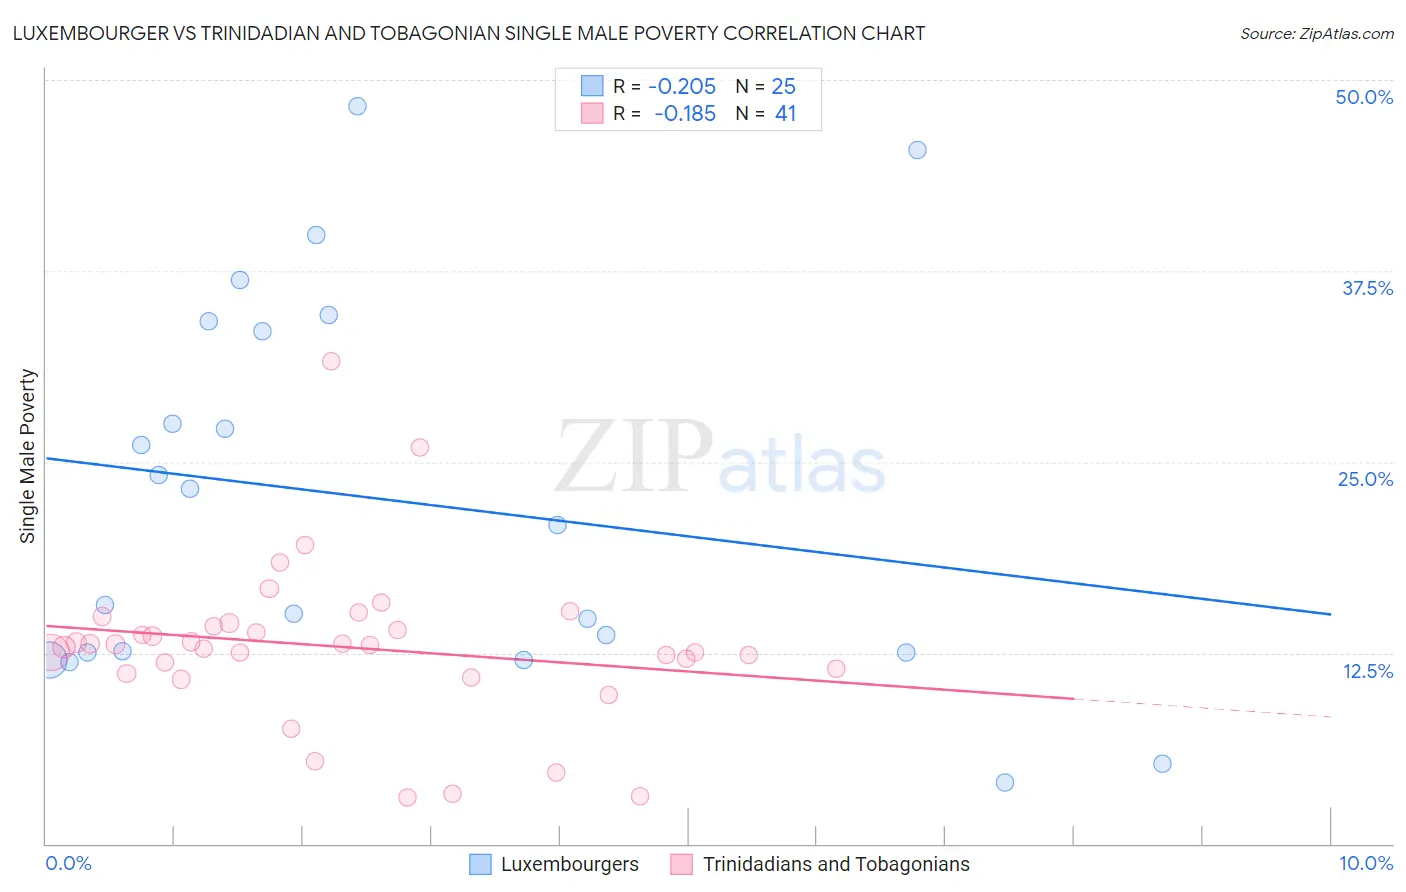 Luxembourger vs Trinidadian and Tobagonian Single Male Poverty